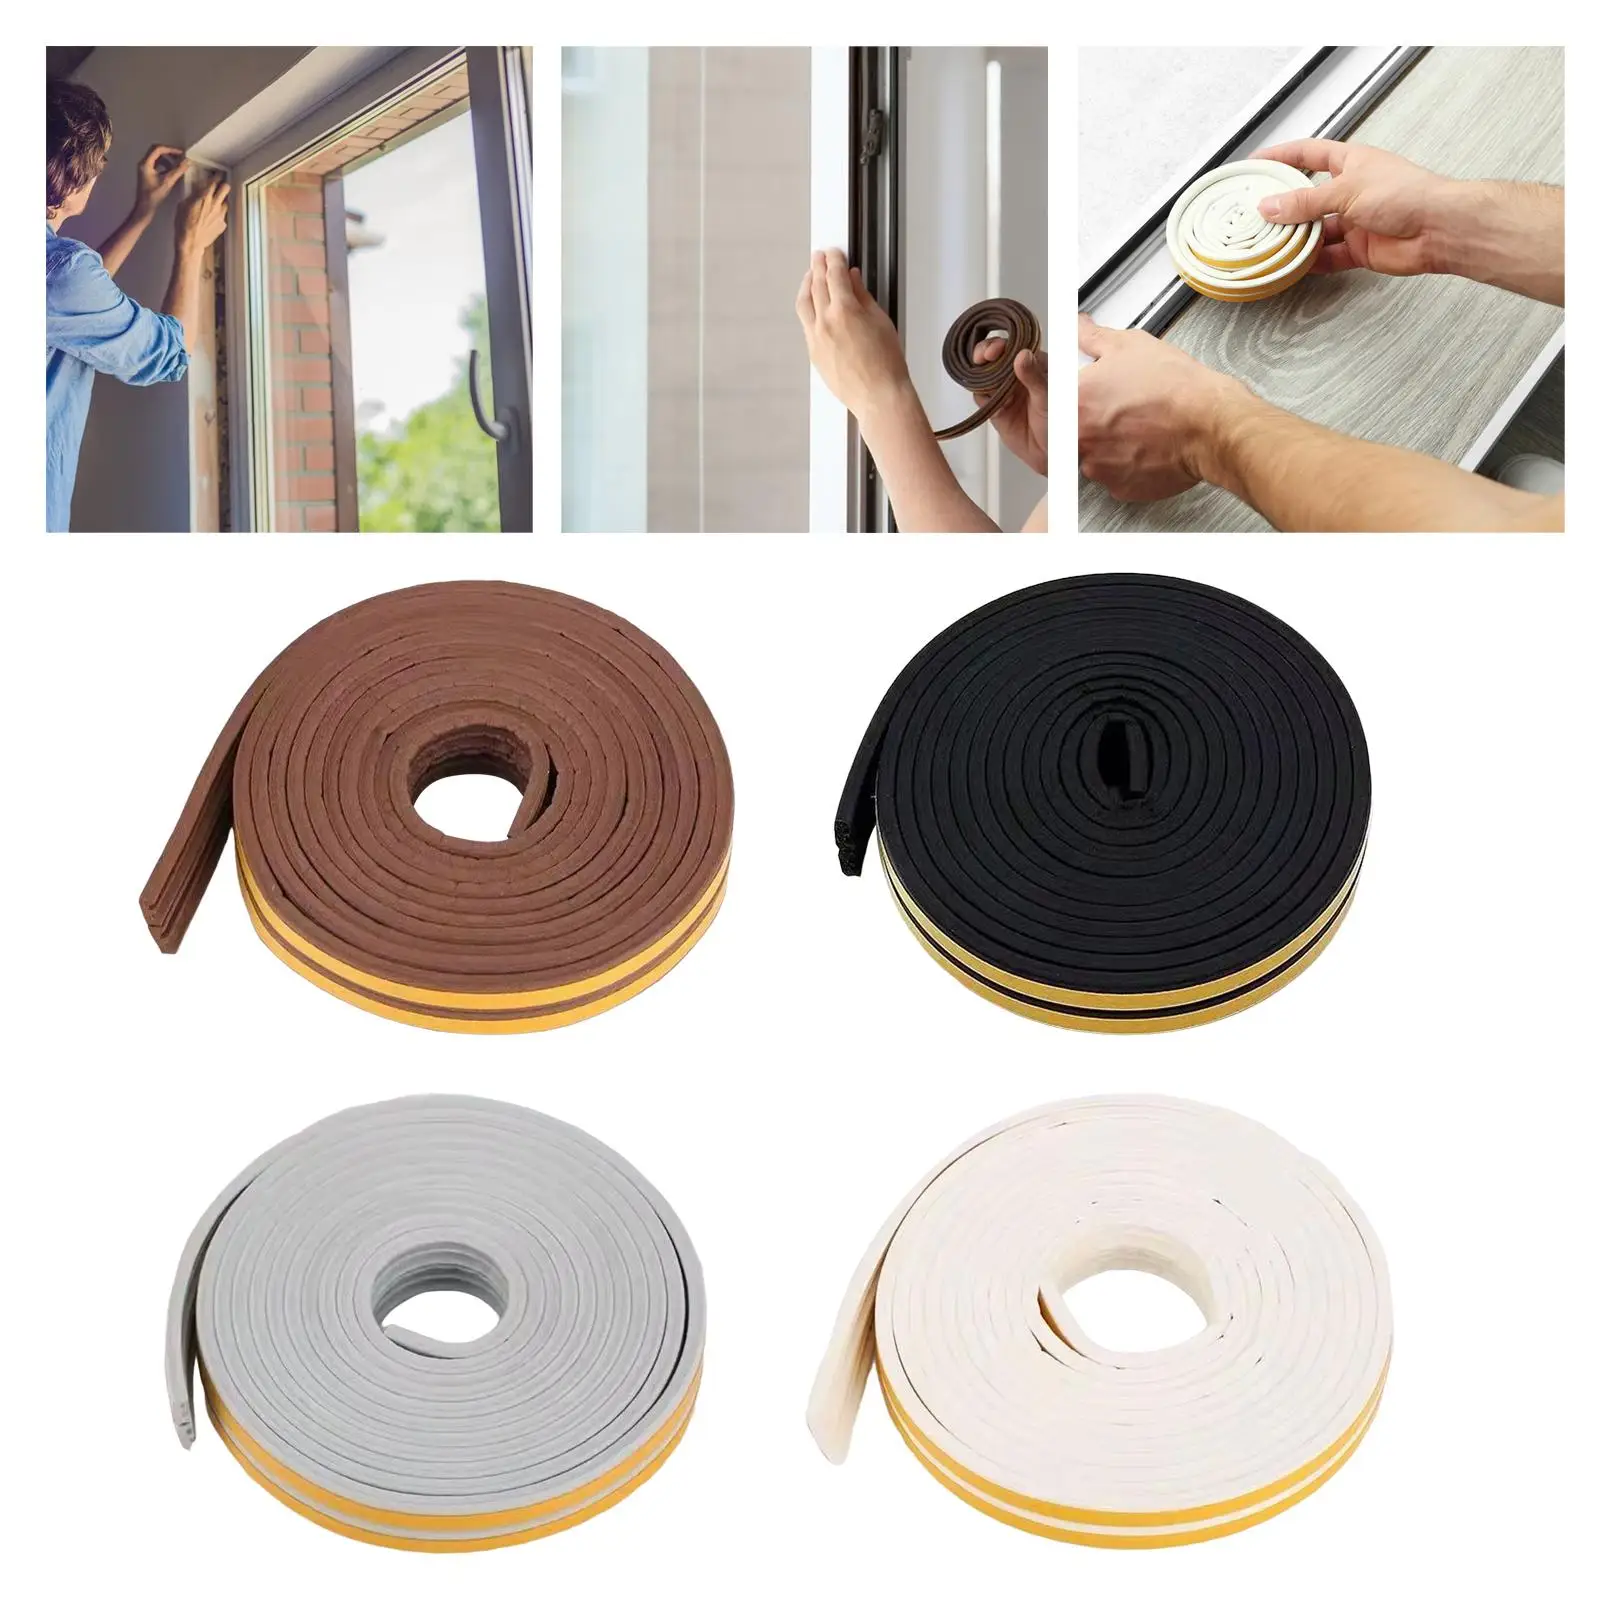 6M Self Adhesive Foam Rubber Door Weather Stripping Strip E Type Wear Resistant Accessory